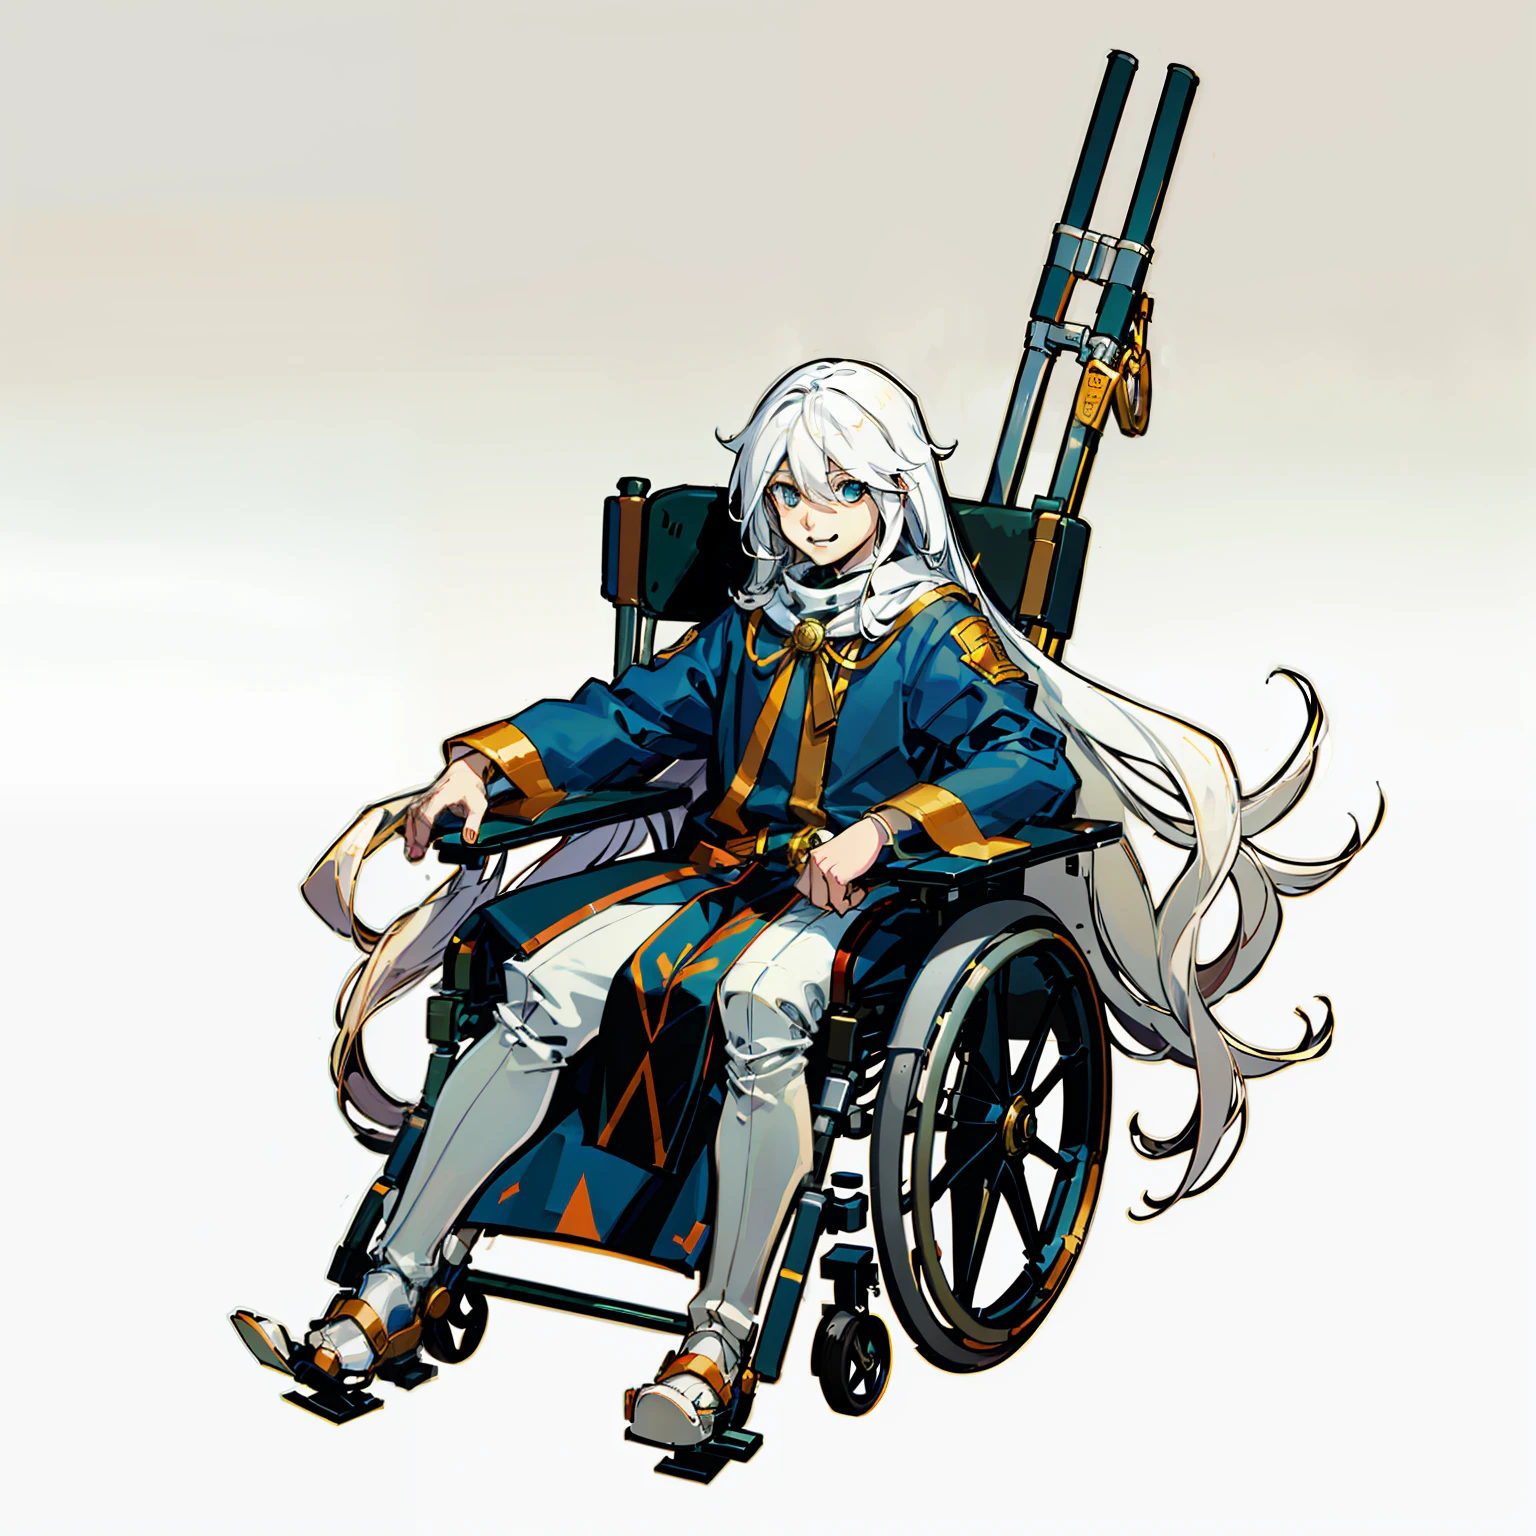 Kid, Very long hair, Smiling, Sitting in a wheelchair, Full body shot, No background, White background, lame, Have a doll, White and gold, god, open thin,